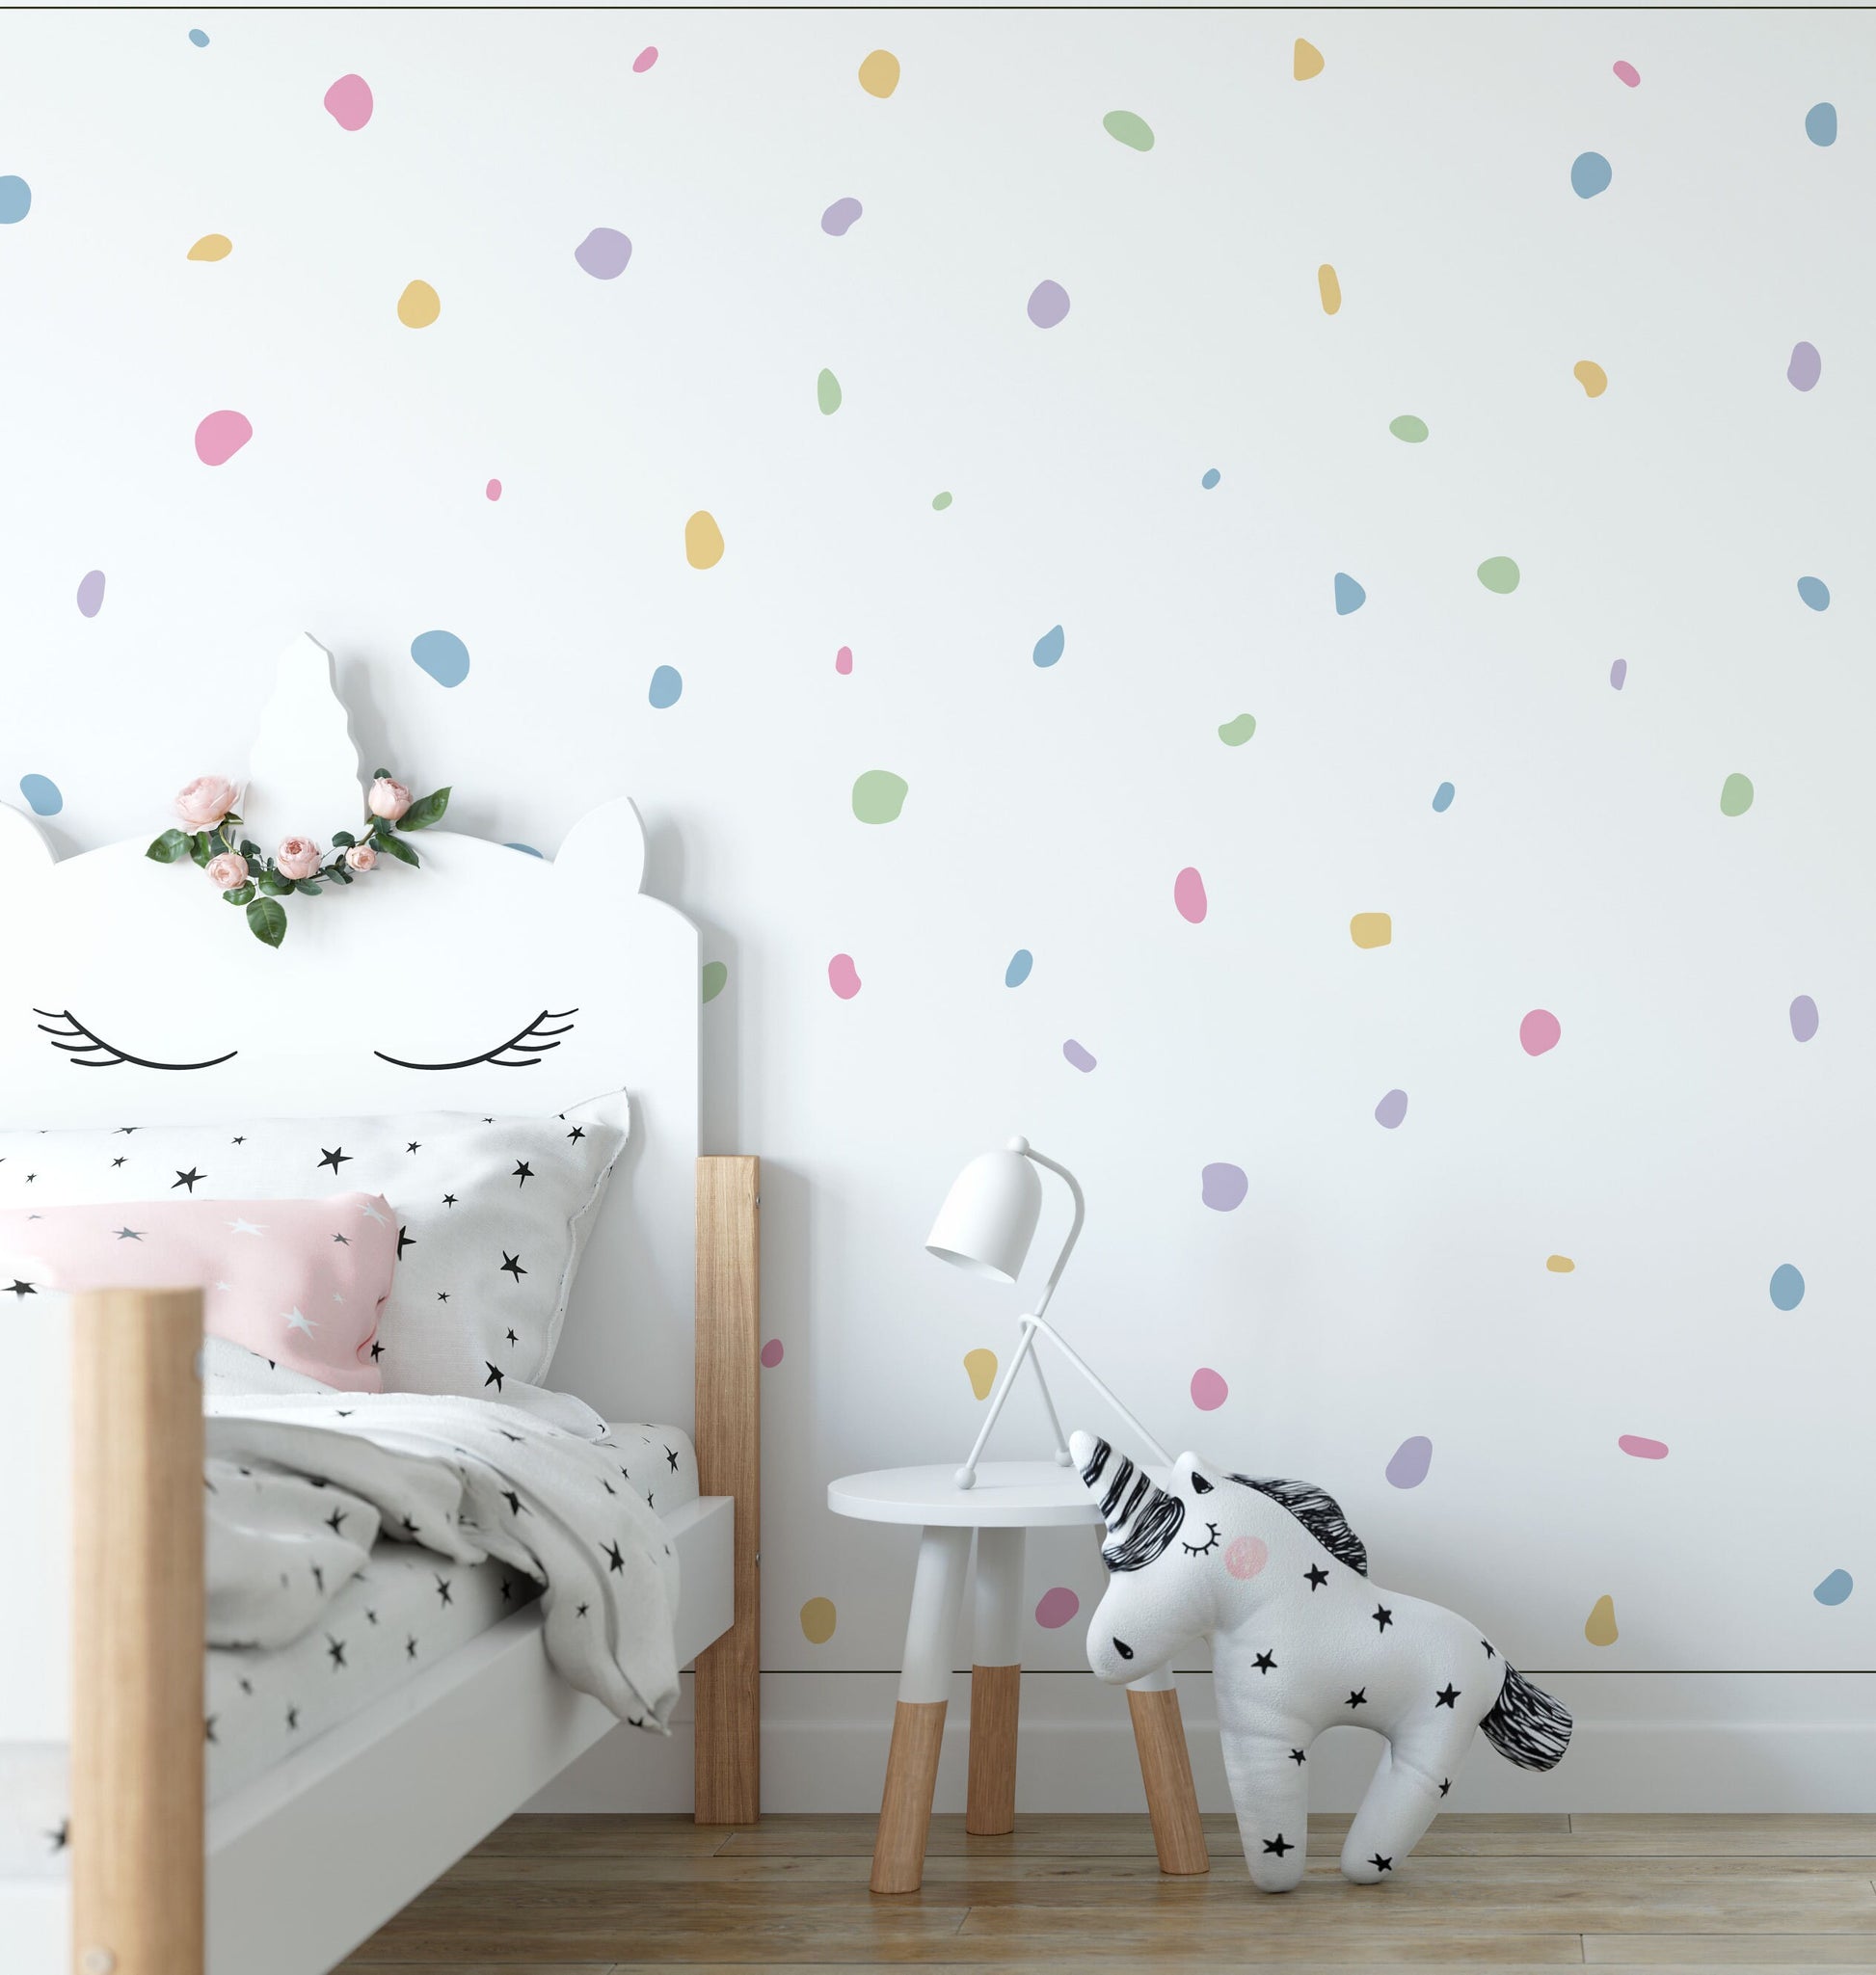 Pastel Colour Wall Sticker Decals For Kids Rooms And Nursery Childrens Bedroom Removable Wall Art